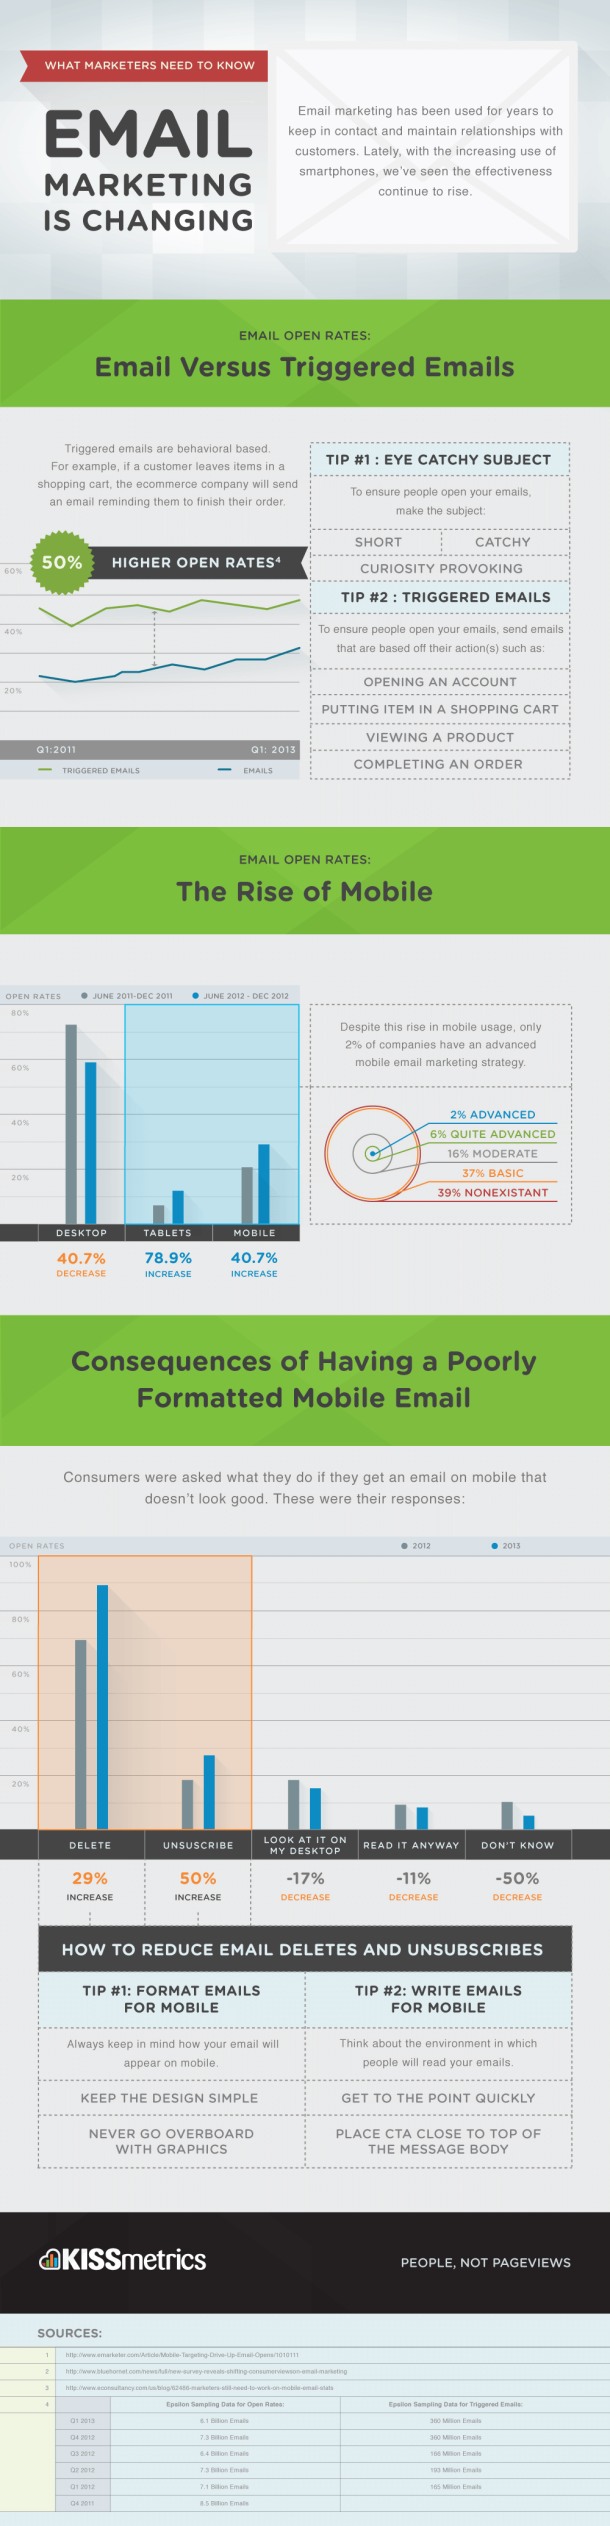 Email-Marketing-is-Changing_1000